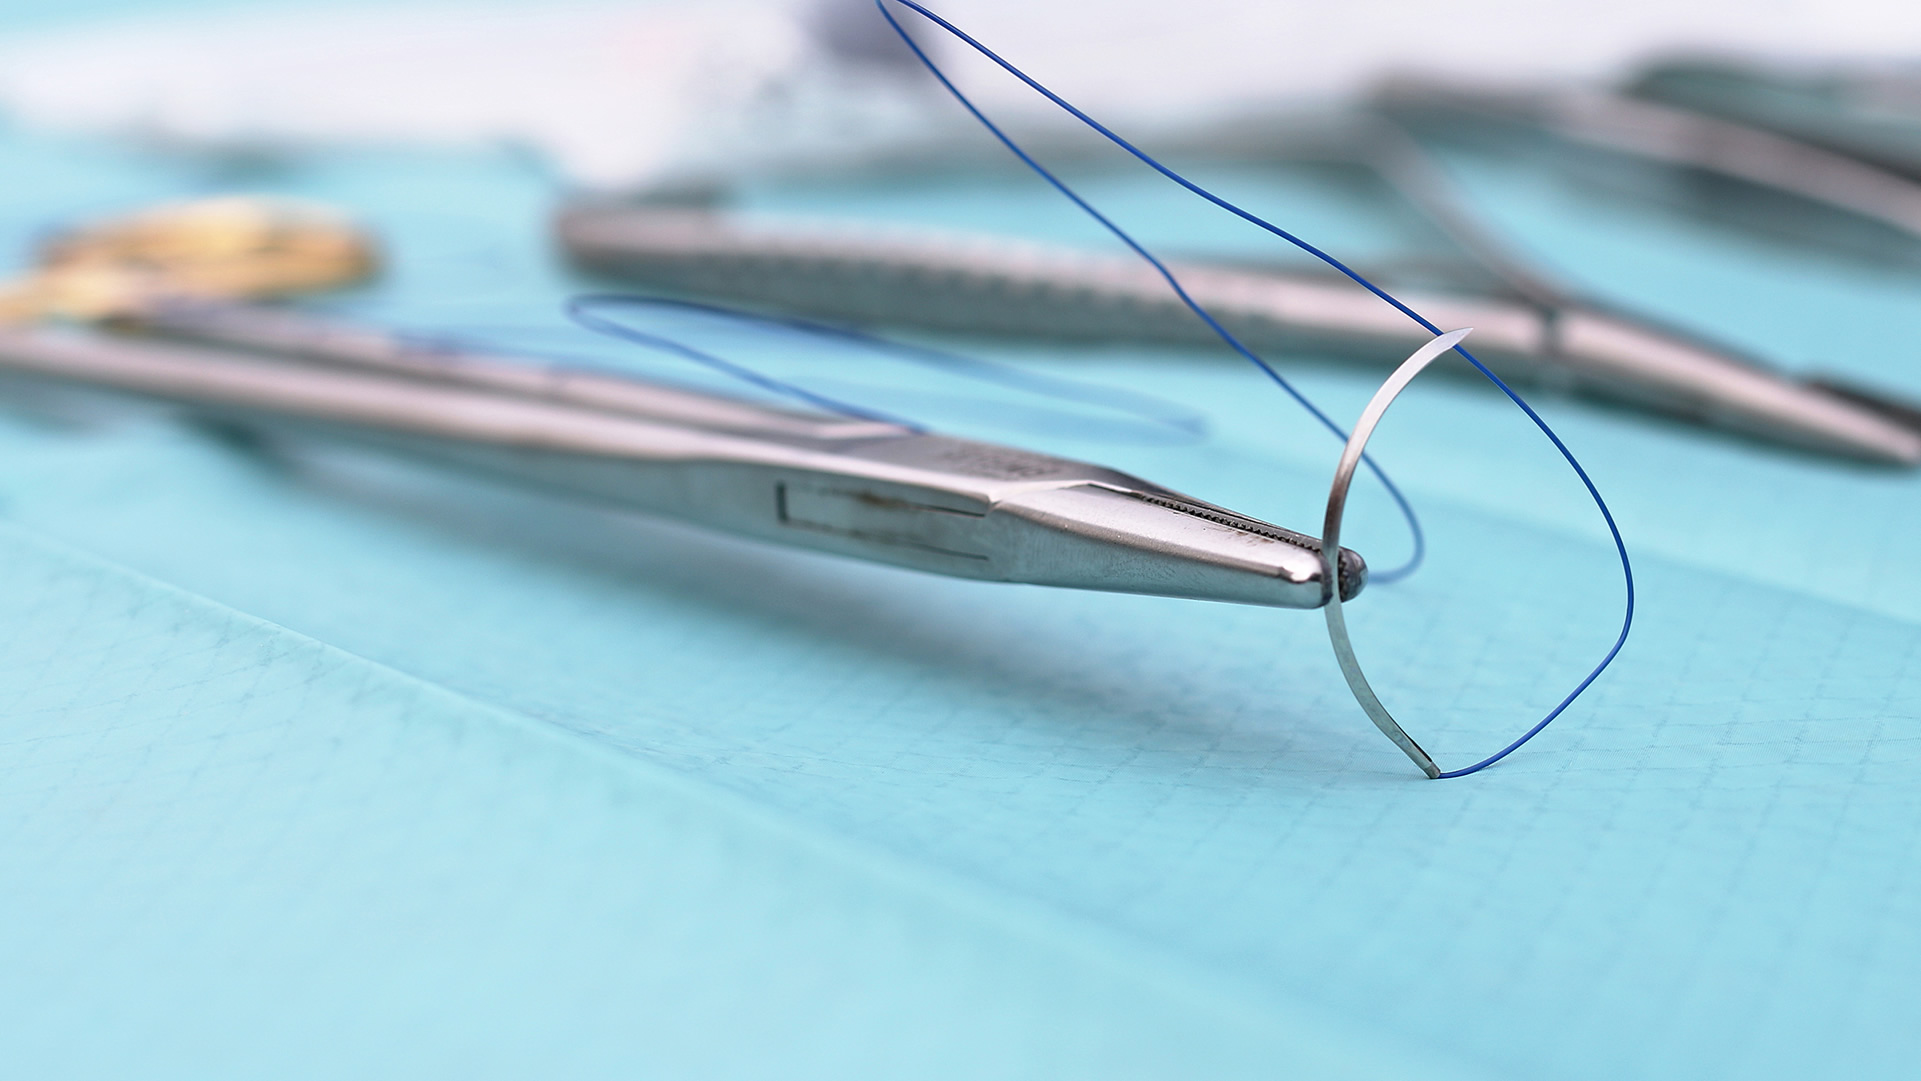 Surgical Thread | Medical and Veterinary Practices - Coats